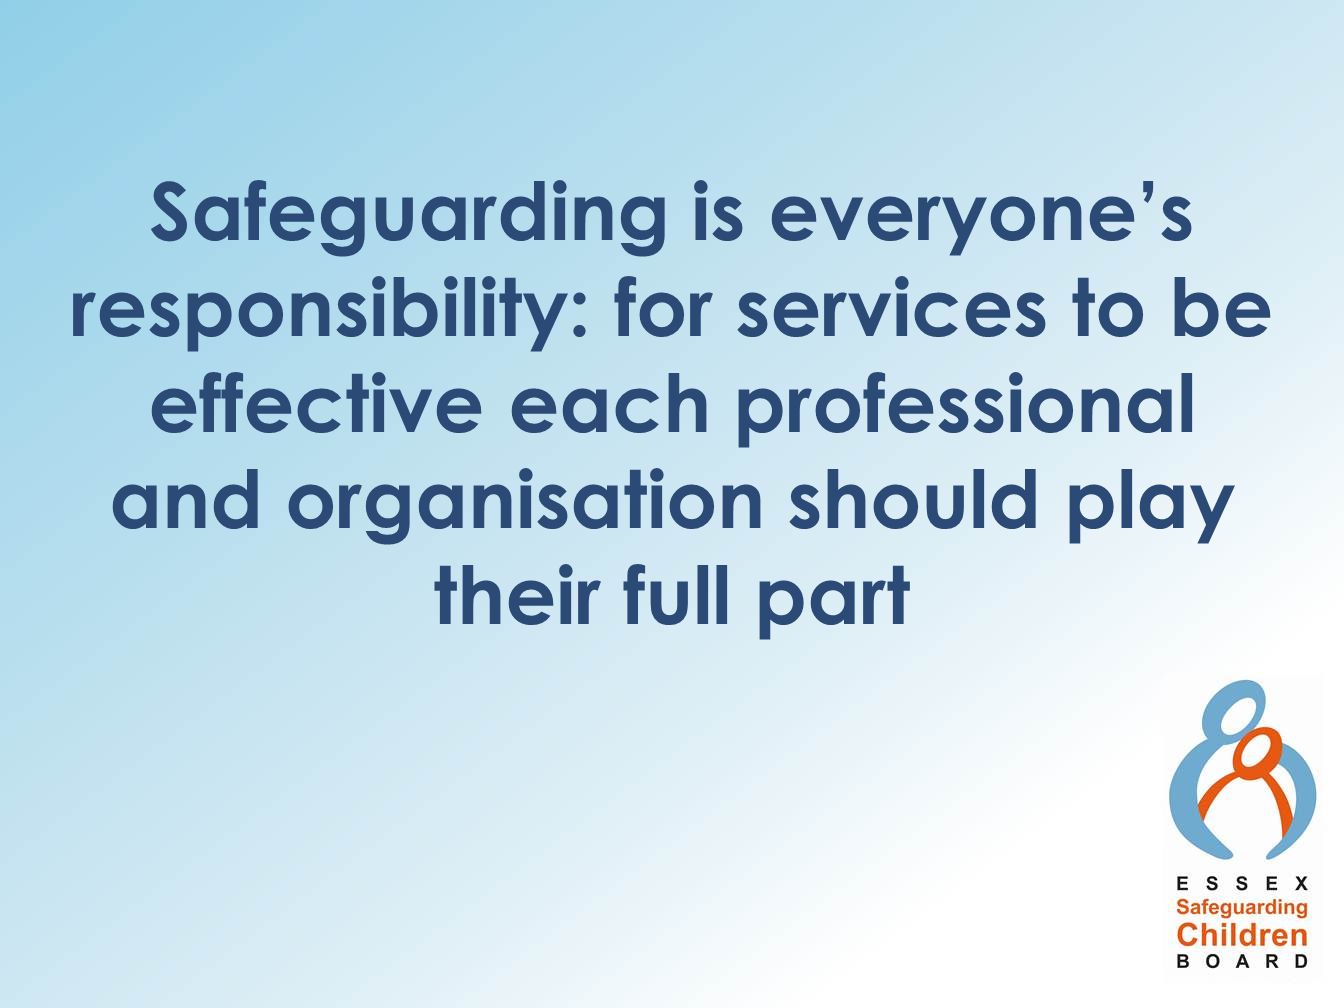 Safeguarding is everyone’s responsibility: for services to be effective each professional and organisation should play their full part